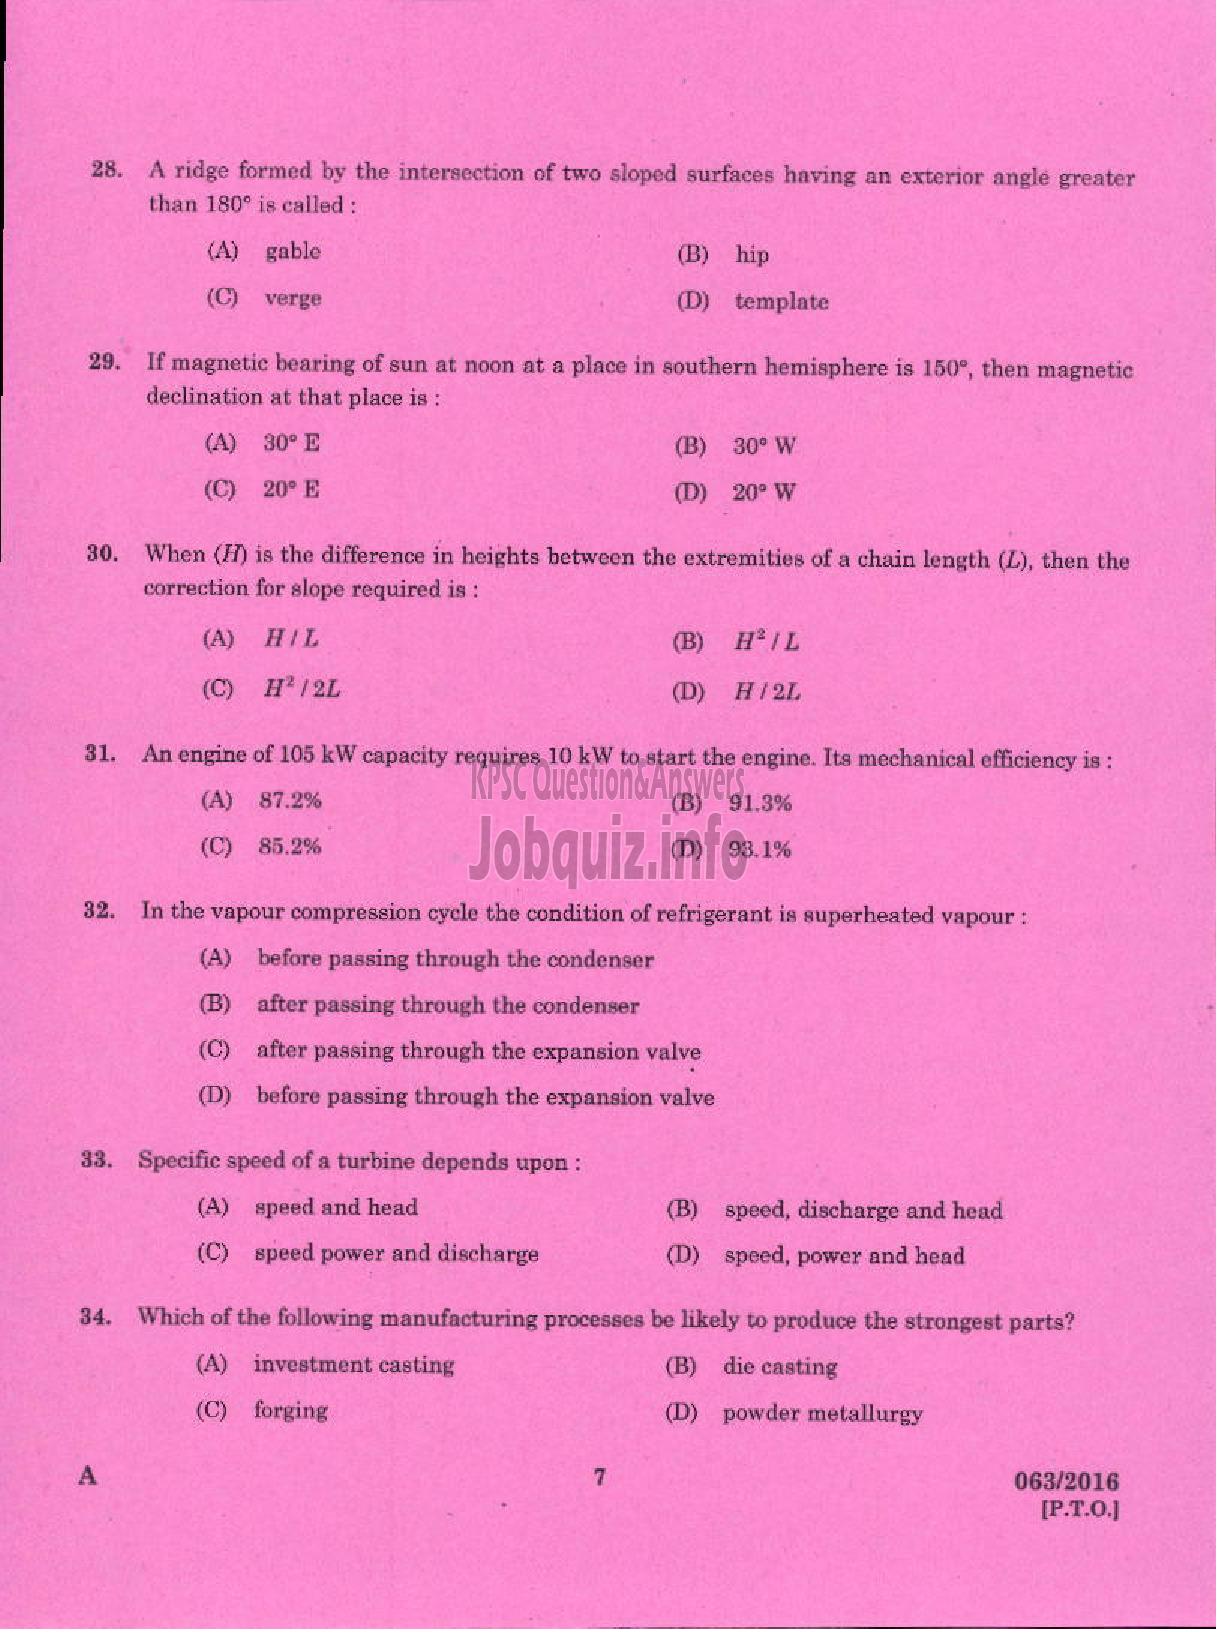 Kerala PSC Question Paper - ASSISTANT PROFESSOR IN ELECTRICAL AND ELECTRONICS ENGINEERING TECHNICAL EDUCATION ENGINEERING COLLEGES-5